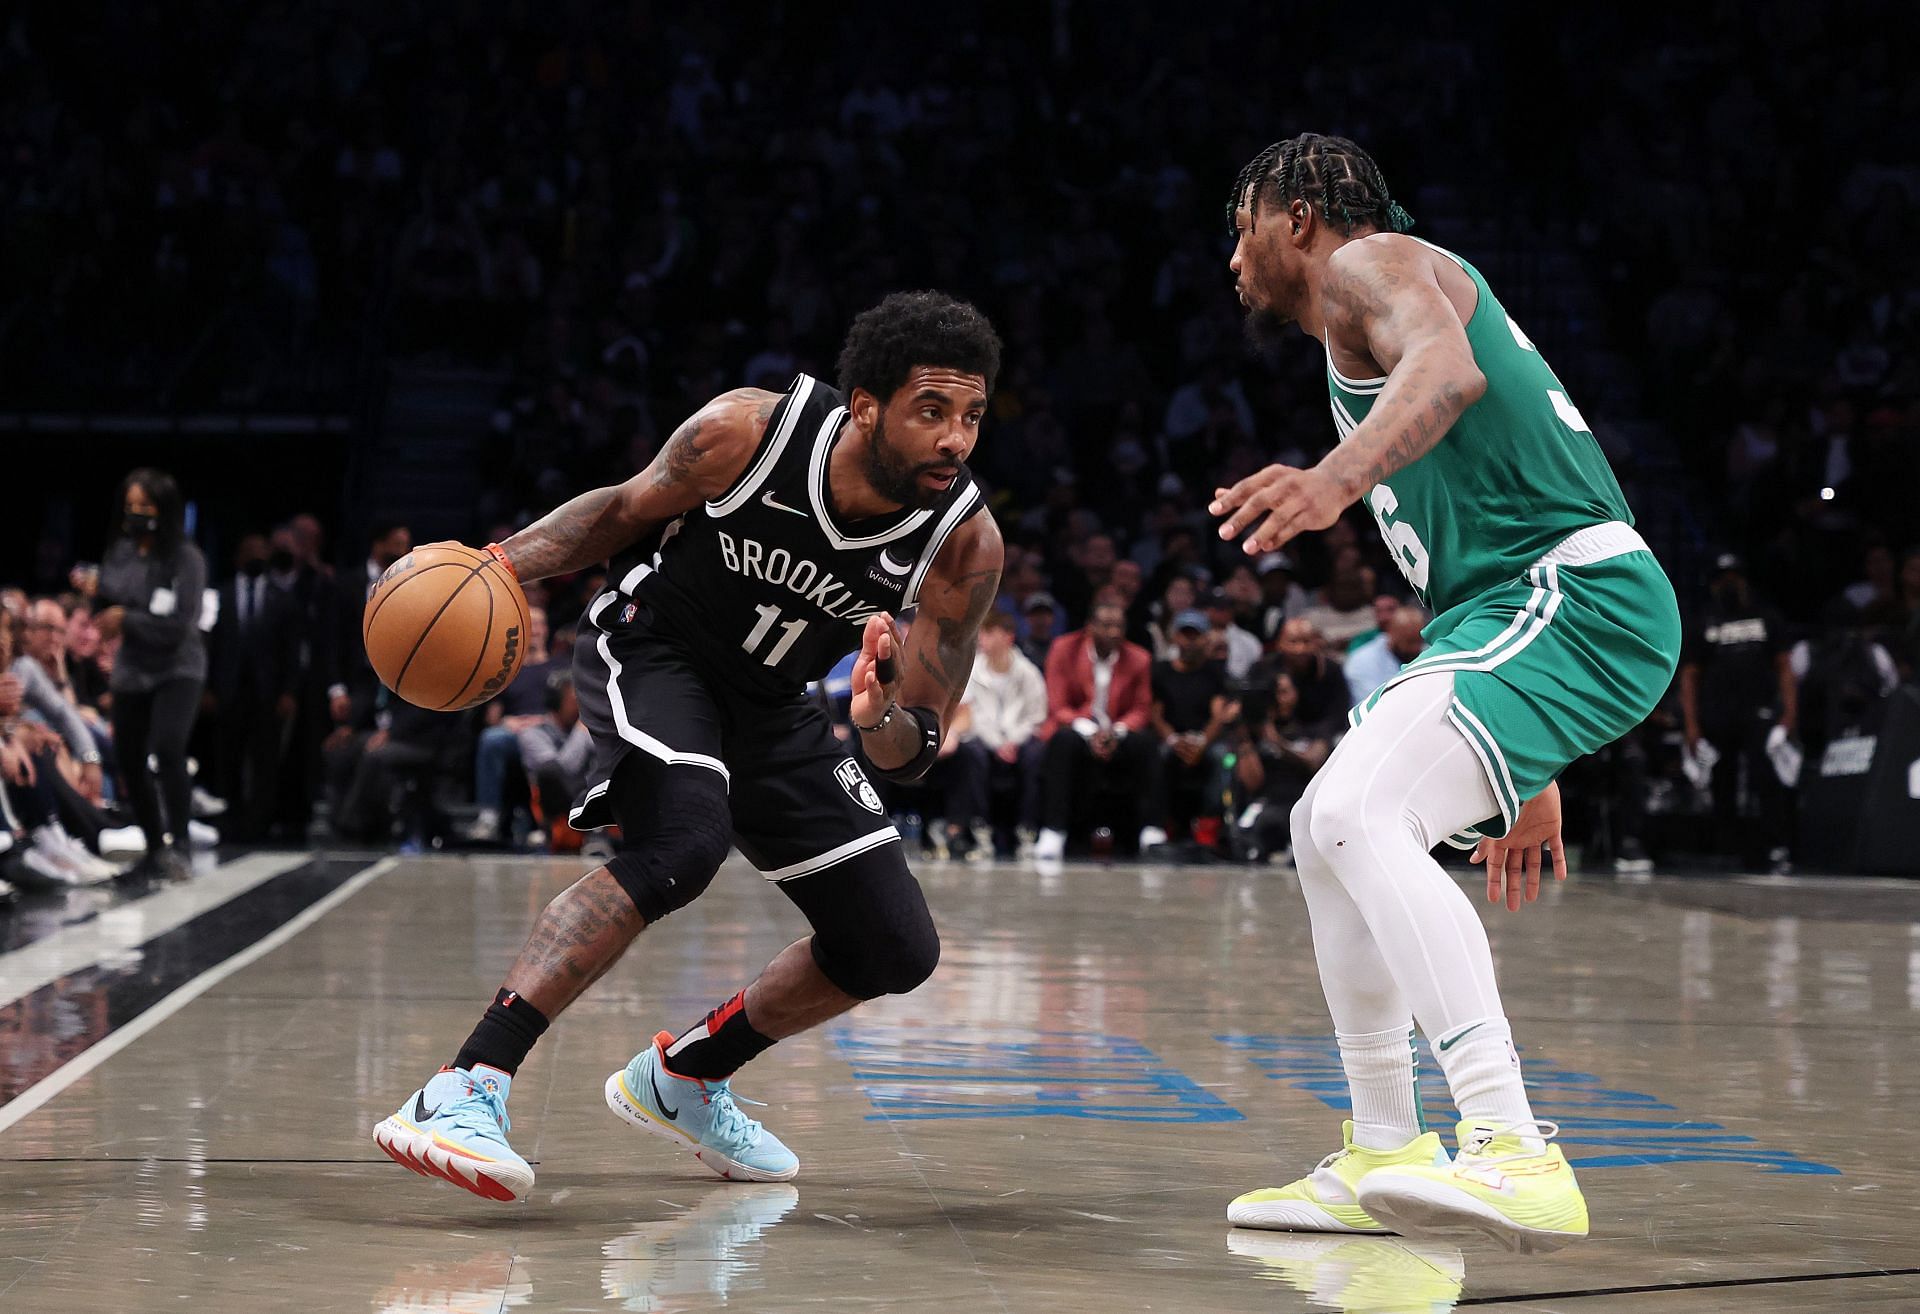 Kyrie Irving of the Brooklyn Nets drives against Marcus Smart of the Boston Celtics.